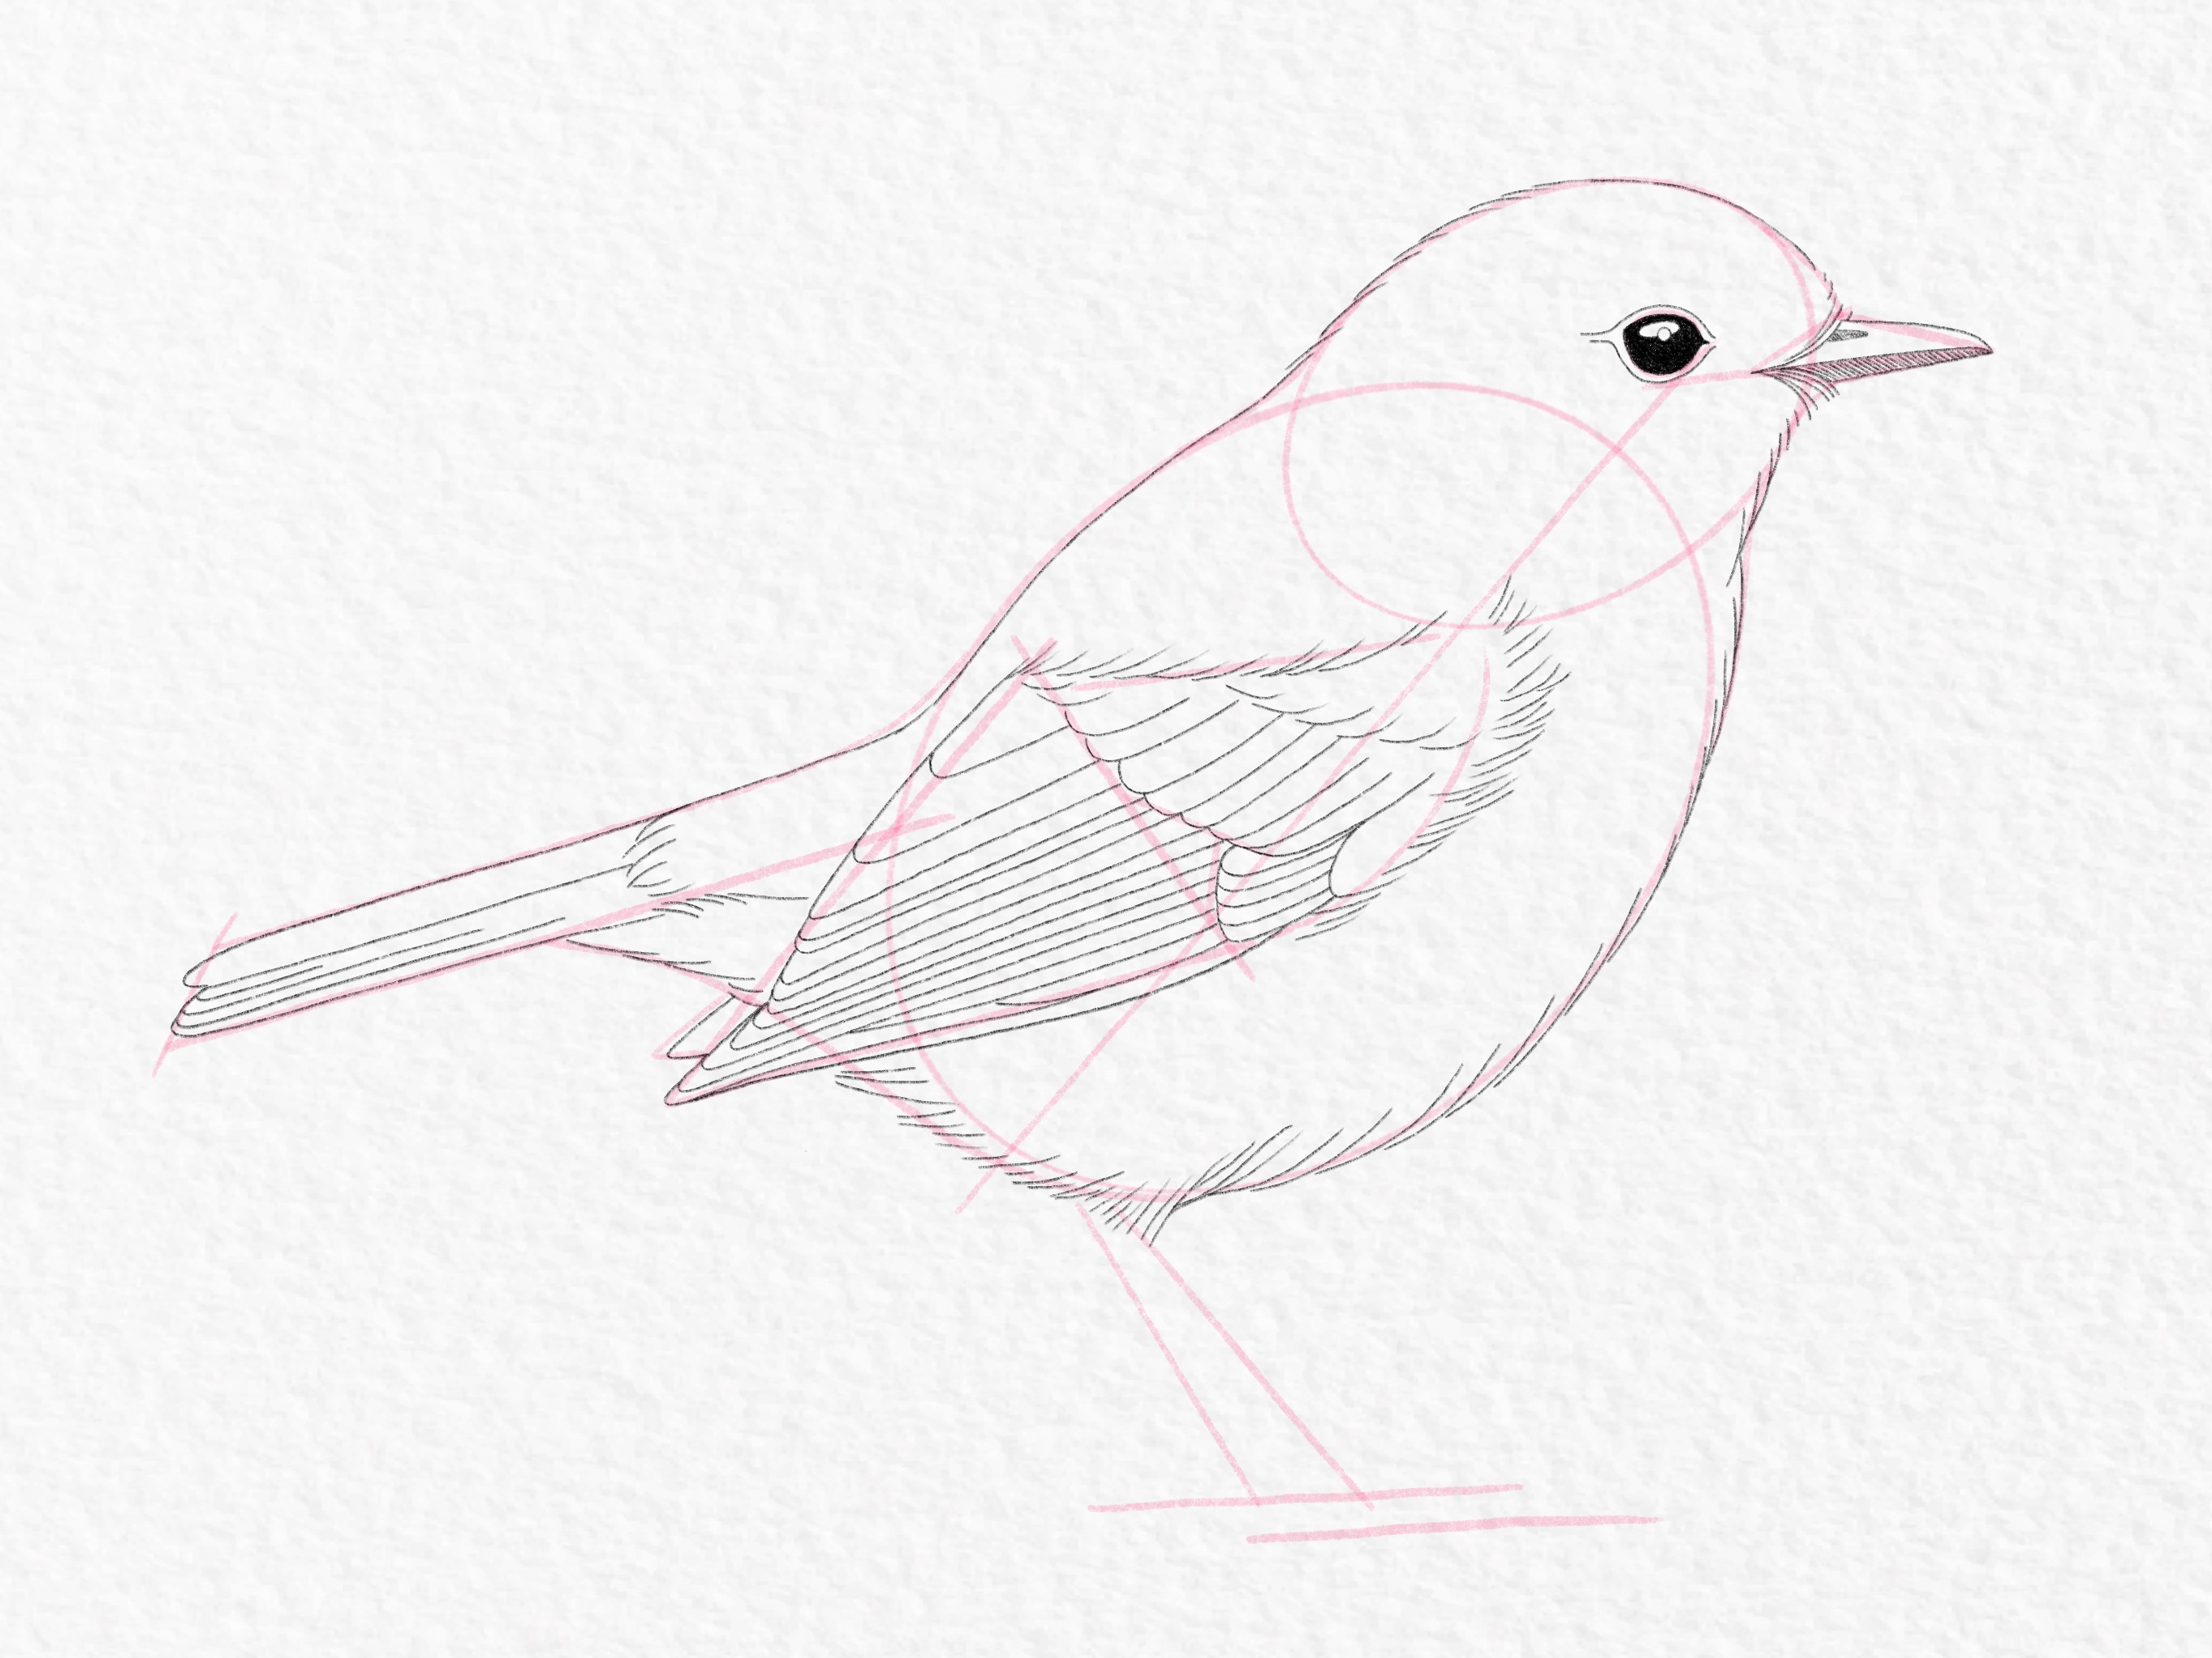 How to draw a bird - Step 15